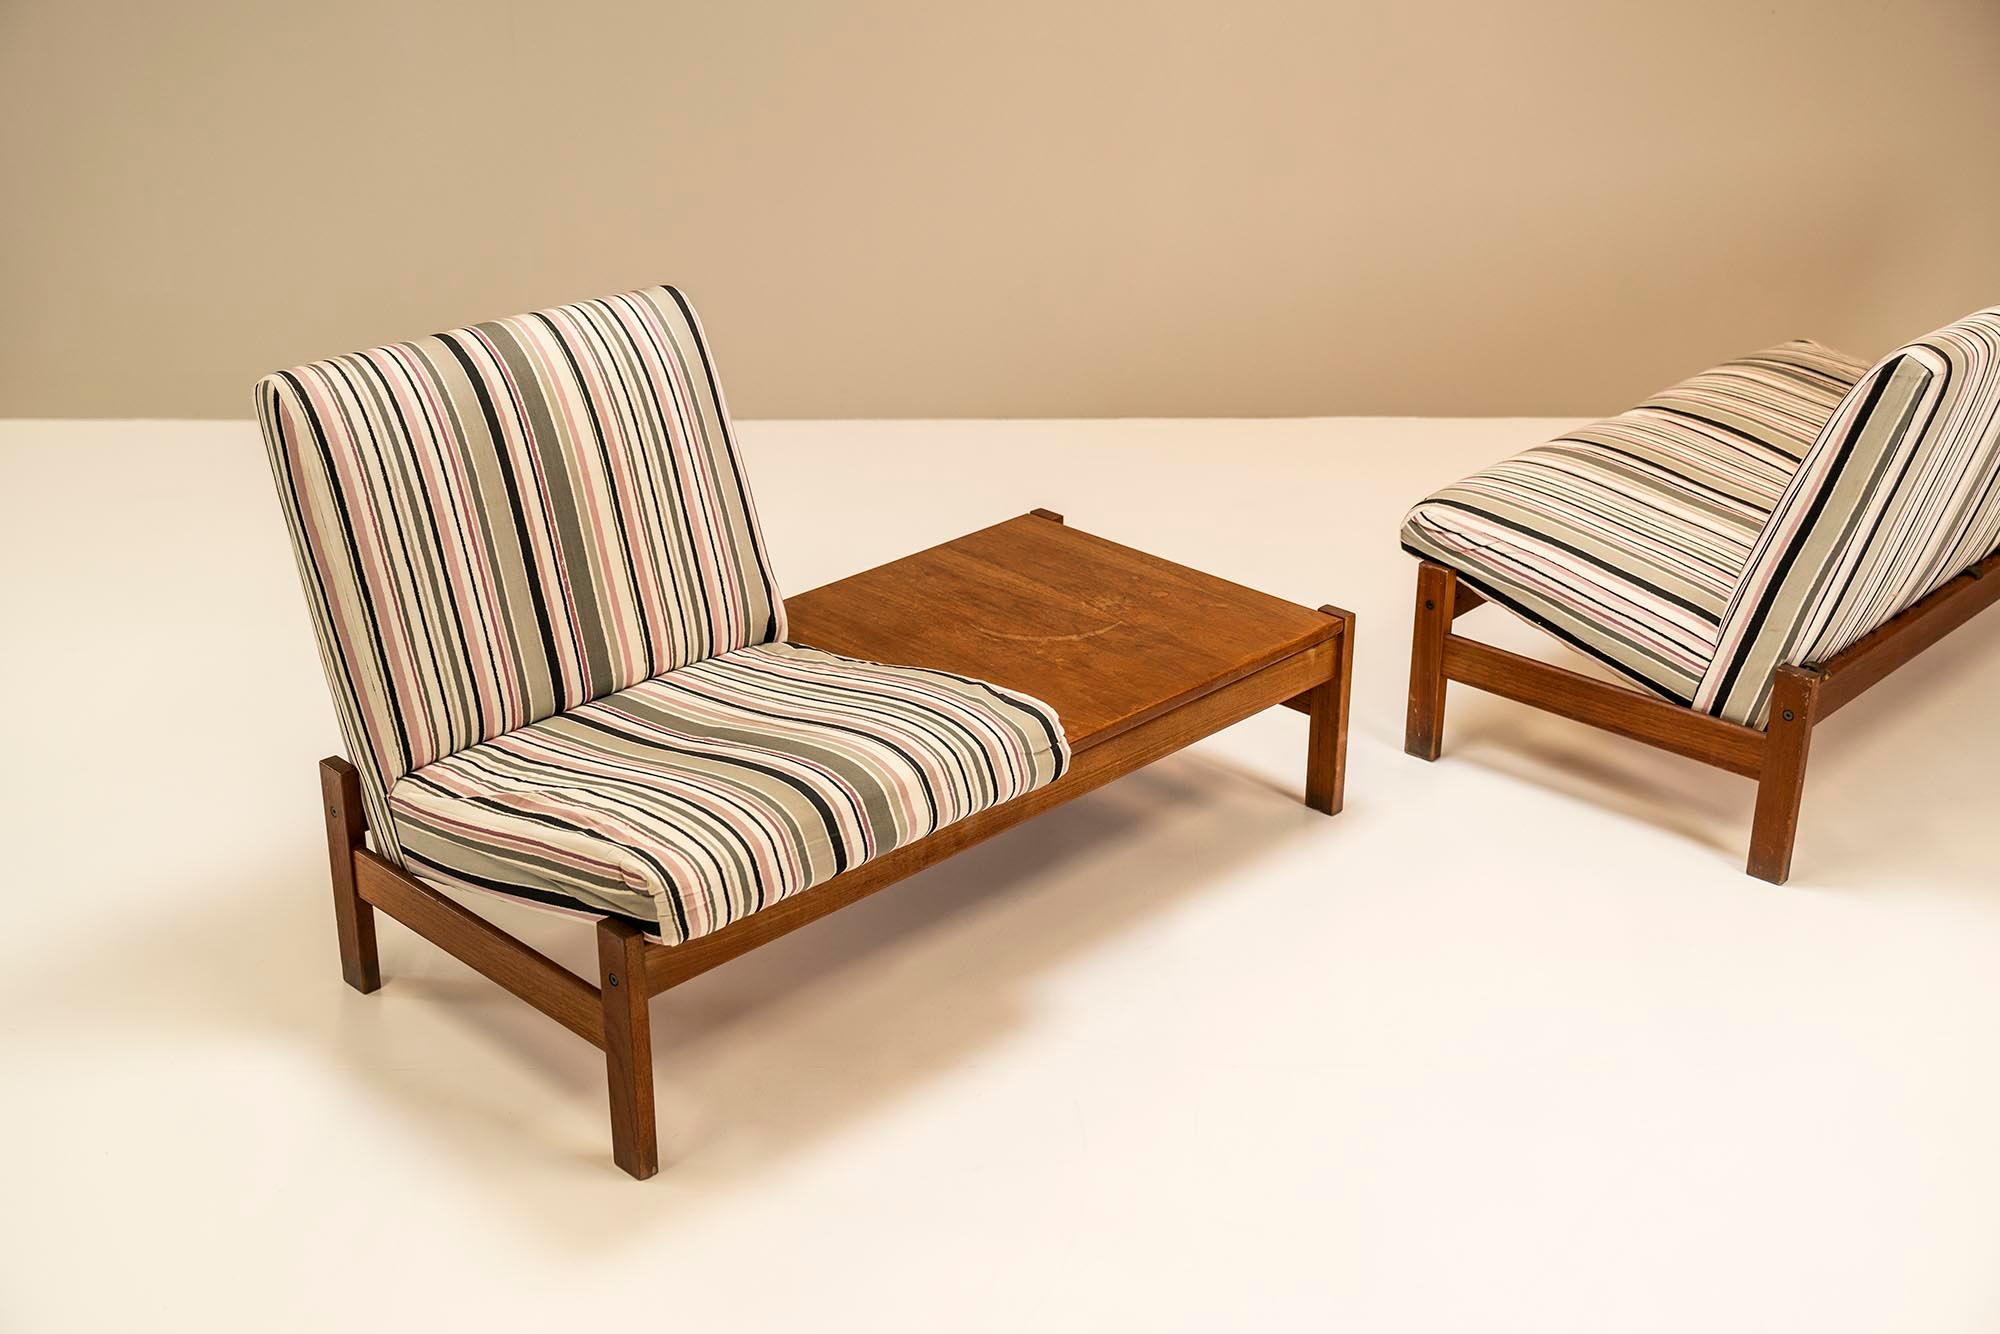 Modular Bench Set in Teak and Original Upholstery, Italy, 1960s For Sale 7